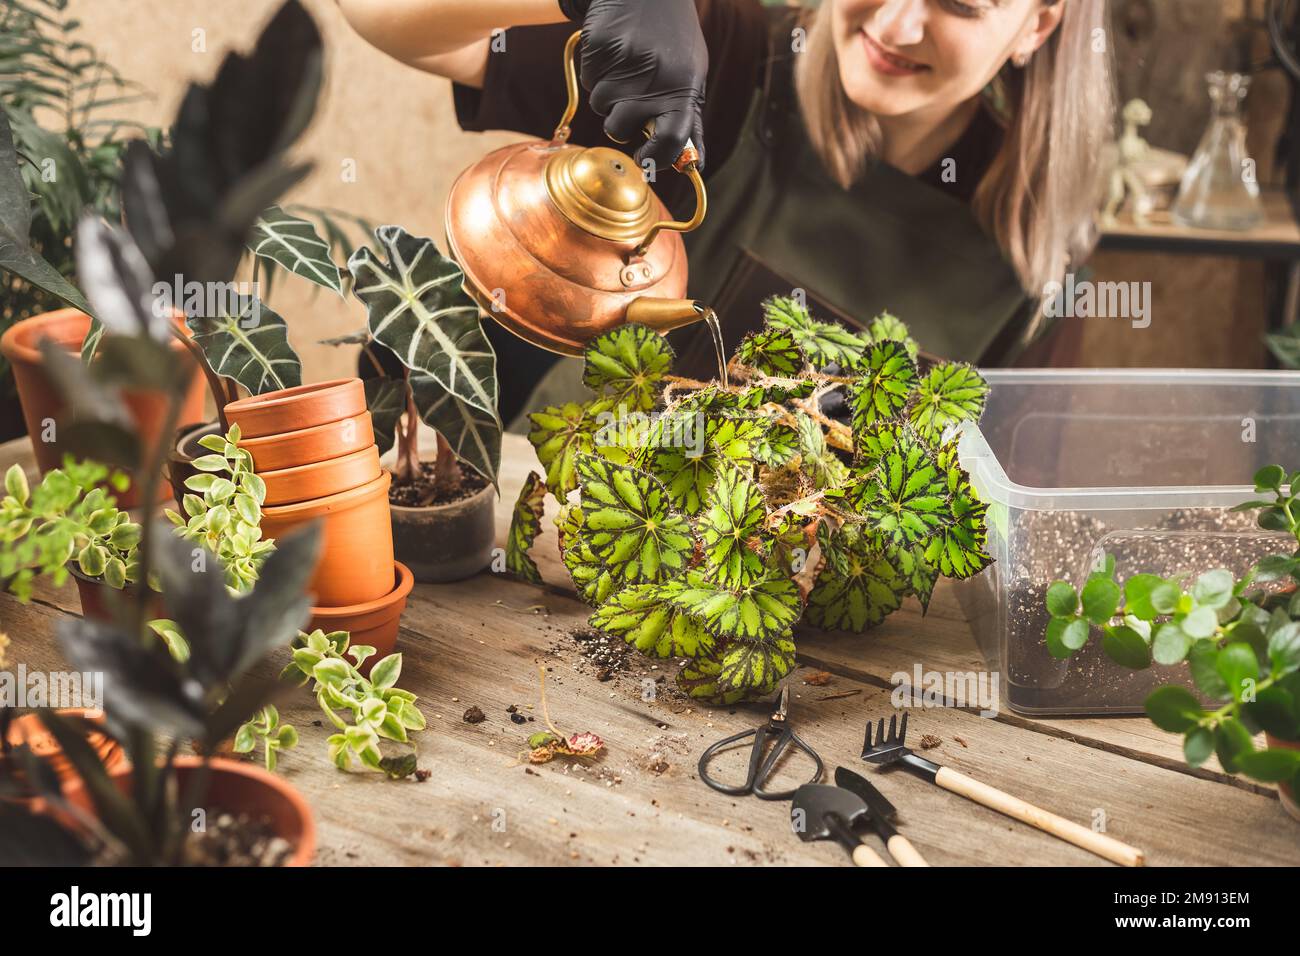 Female gardener wearing black rubber protective gloves watering indoor plant after repot using a copper vintage teapot. Concept of home garden Stock Photo